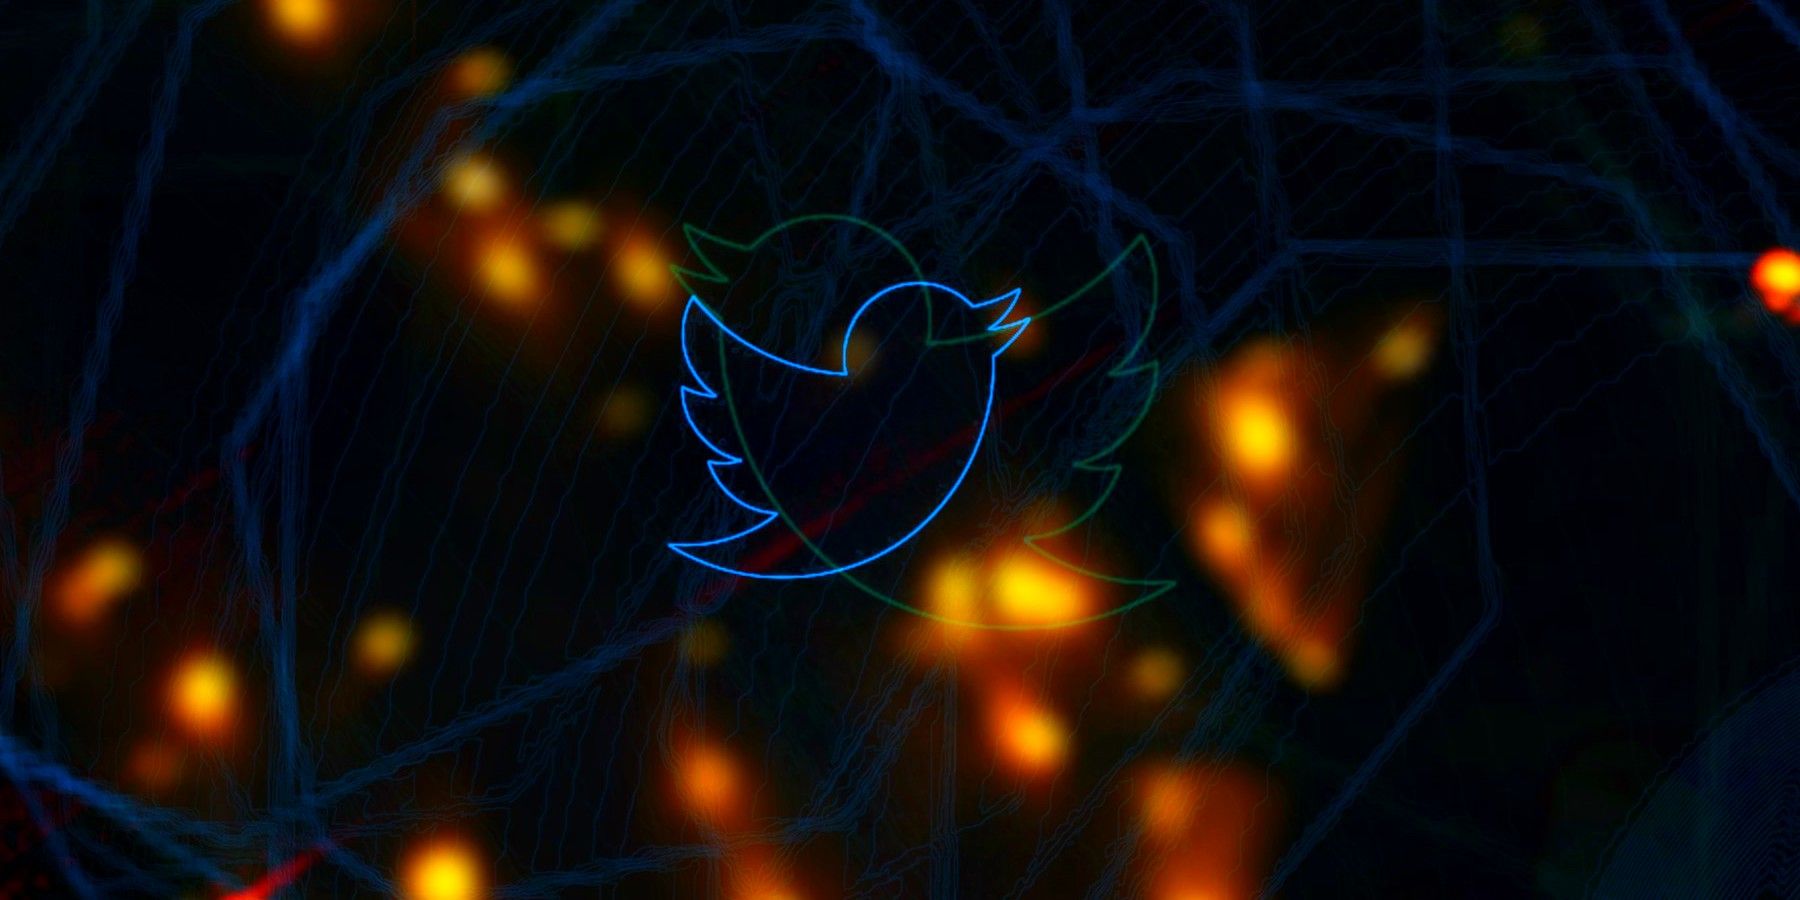 Twitter’s New Bounty Challenge Pays Hackers For Finding AI Bias In Images